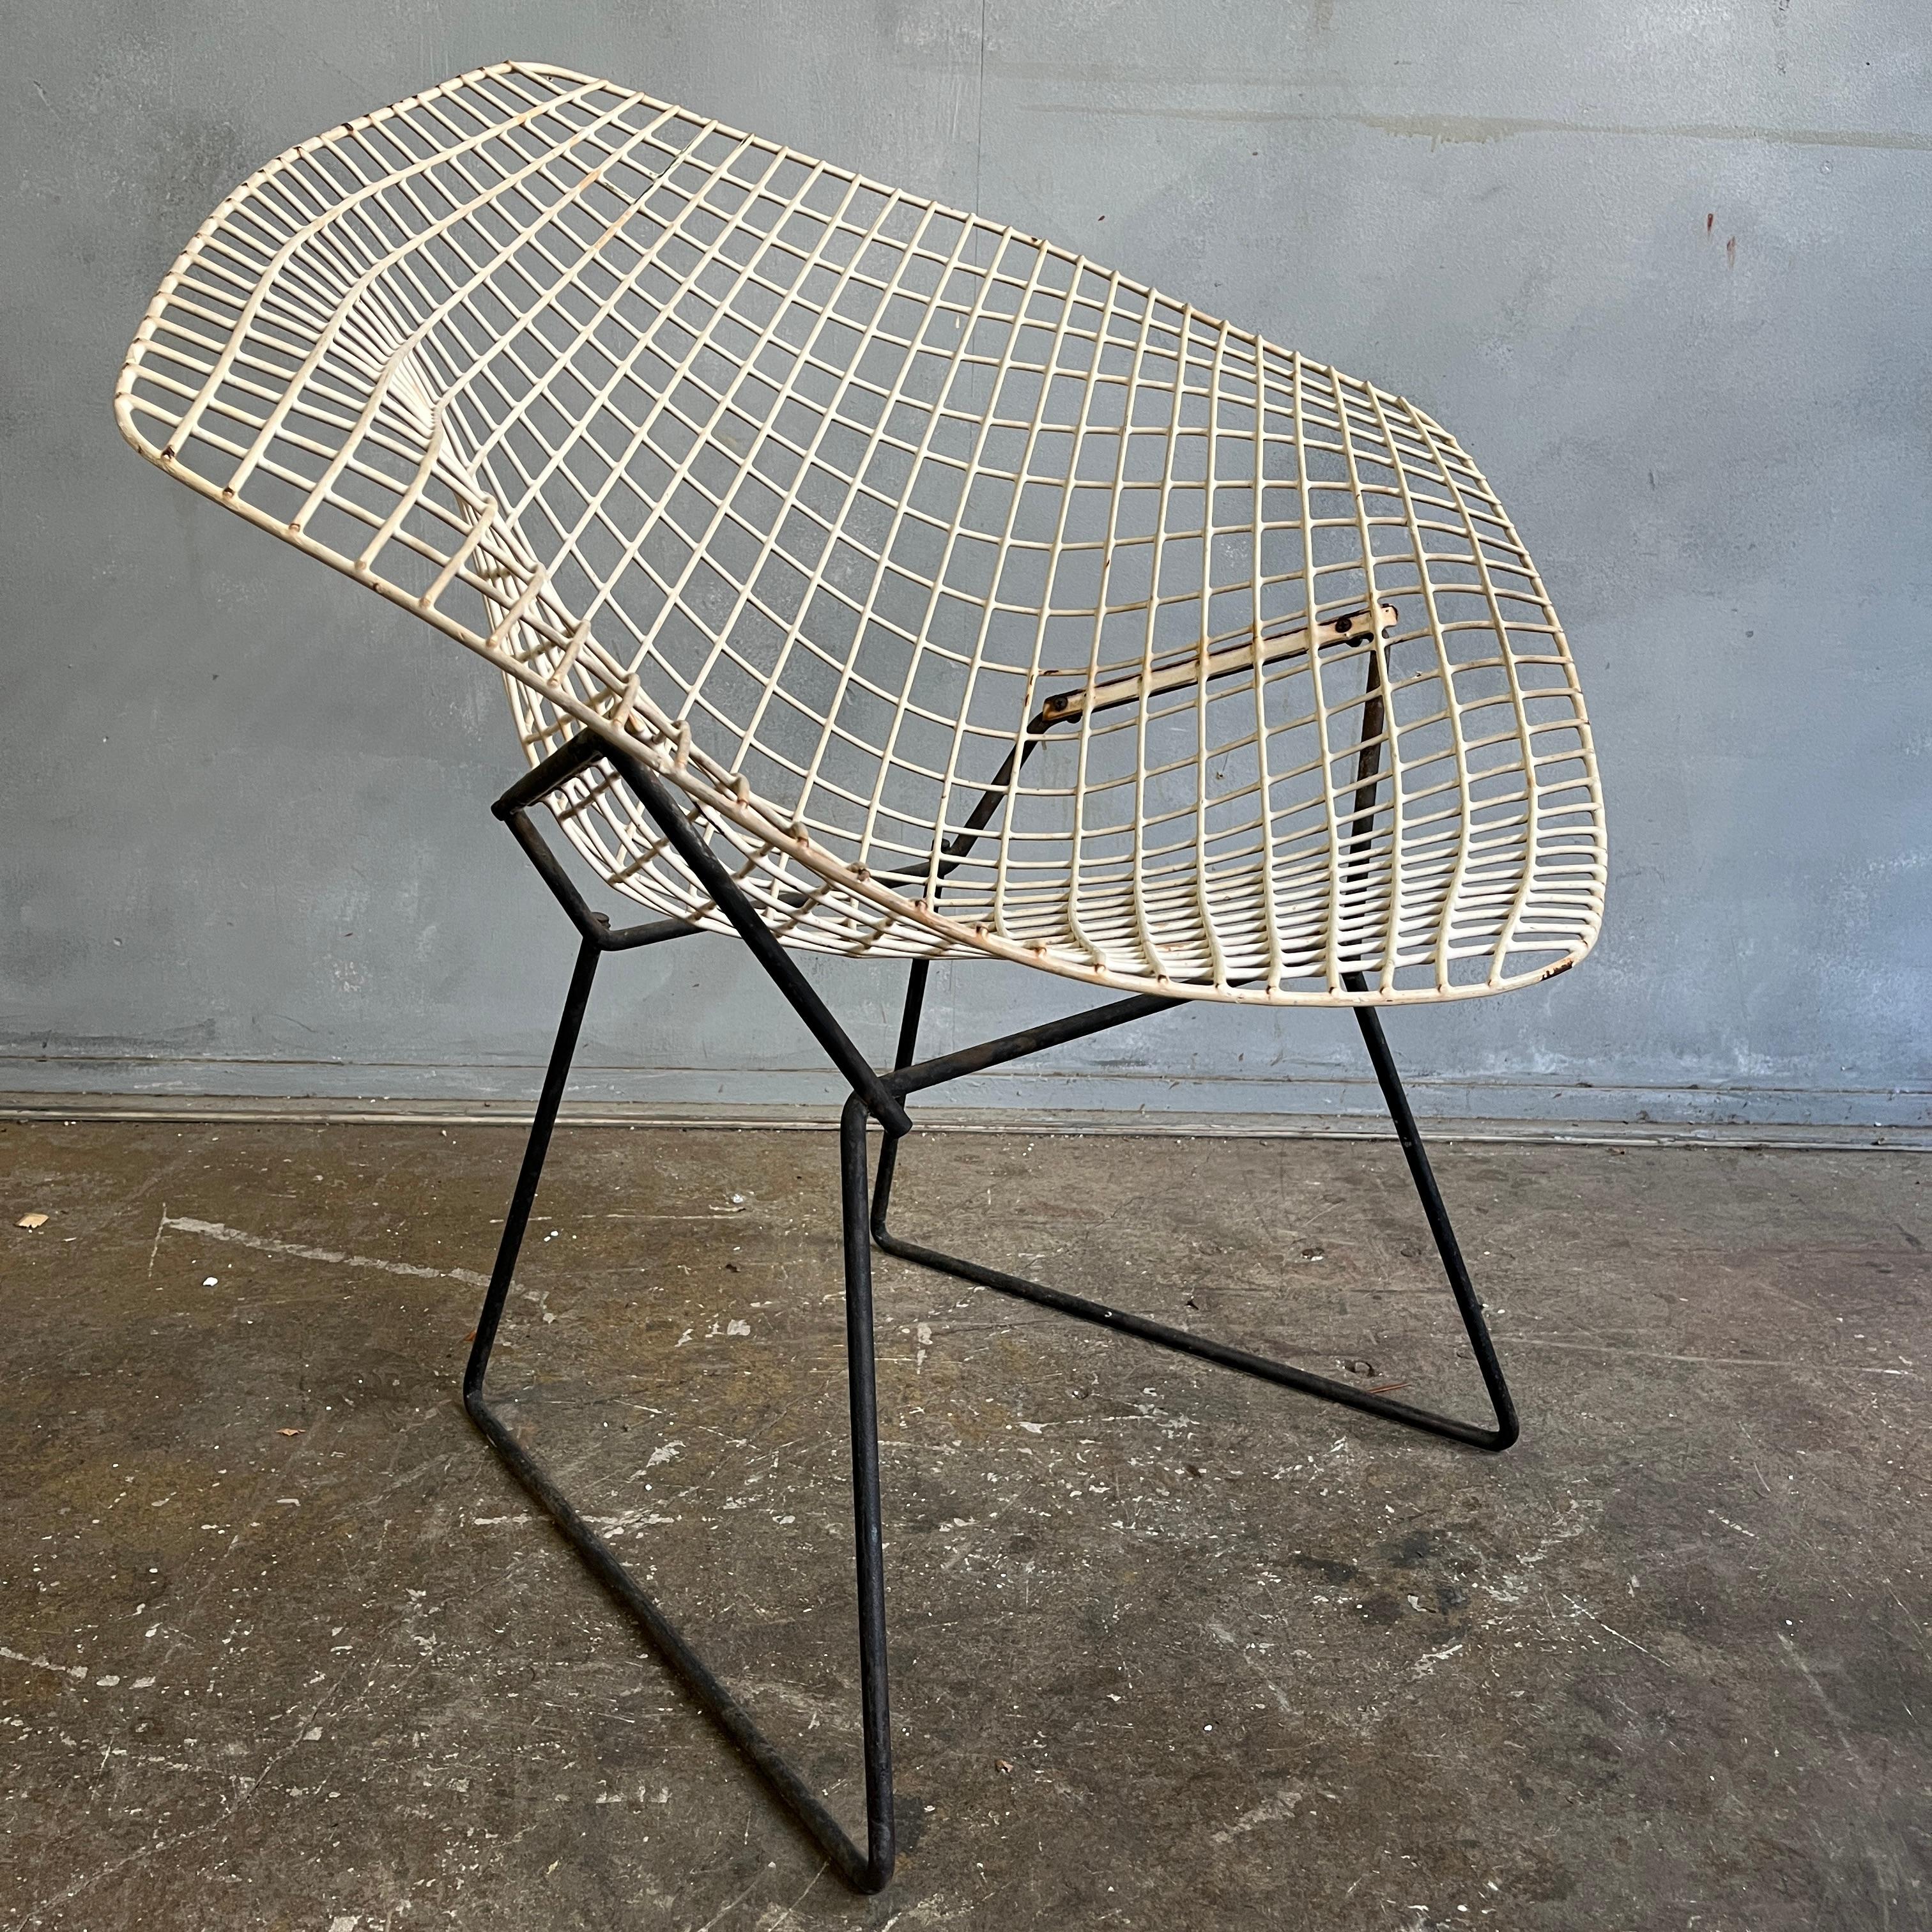 Knoll started production of Harry Bertoia's Diamond chair in the early 1950s. Since then it has become one of the most iconic designs of Mid-Century Modernism. This is a period piece in original condition. Two available

Shipping 300 Continental US